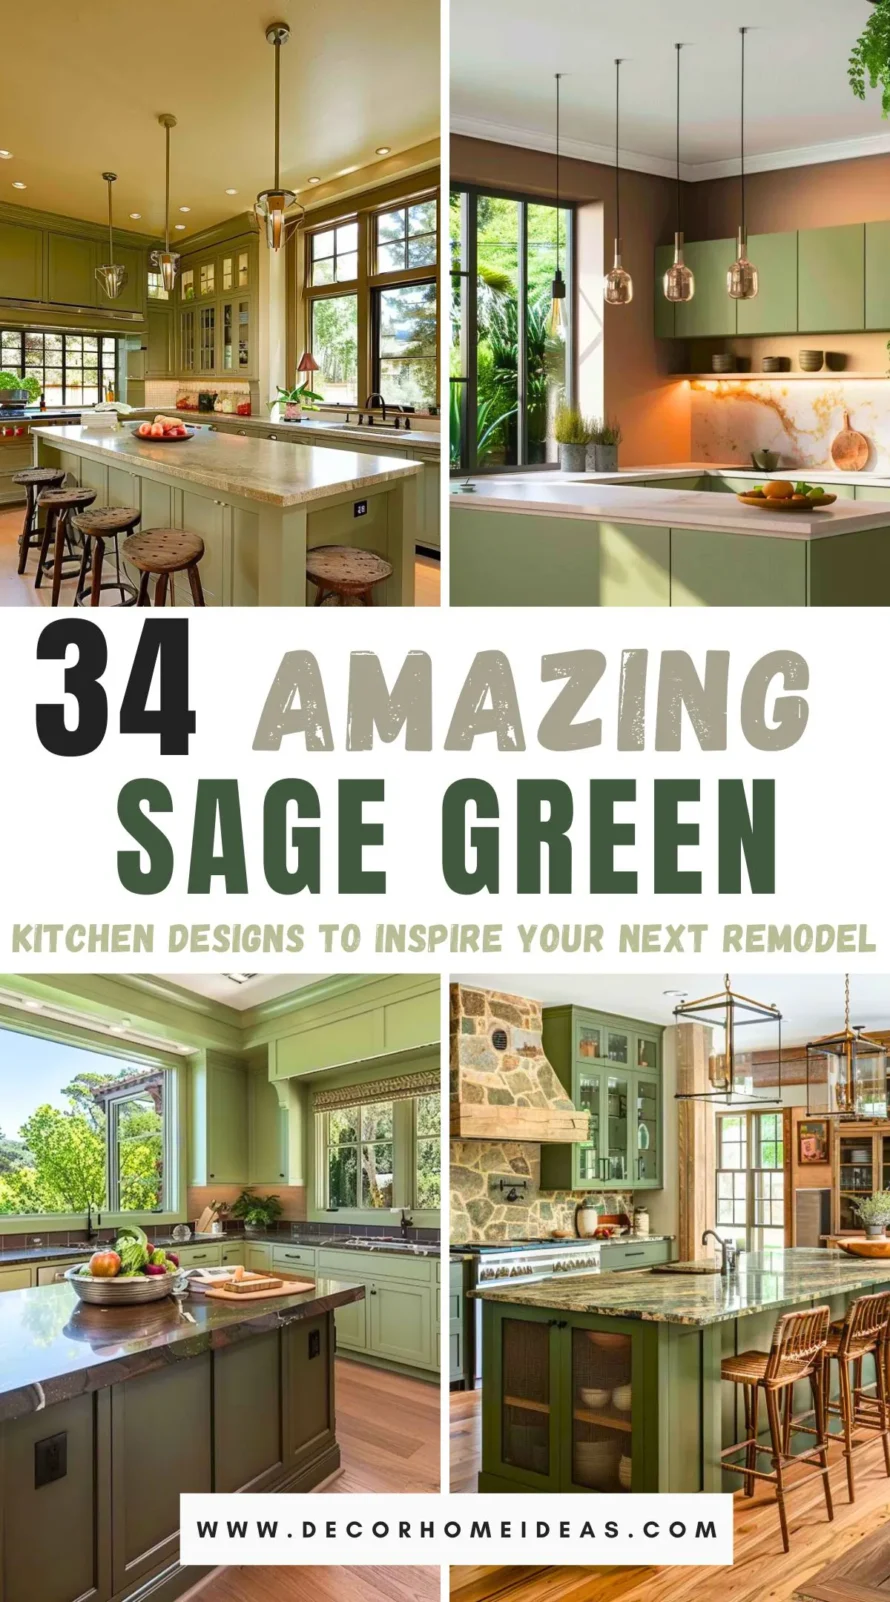 Discover 34 awesome sage green kitchen design ideas that will transform your culinary space into a serene and stylish haven. From cabinets and backsplashes to countertops and decor, these ideas showcase how to incorporate this trendy, earthy hue in various styles. Explore the perfect balance of elegance and coziness in your kitchen makeover!